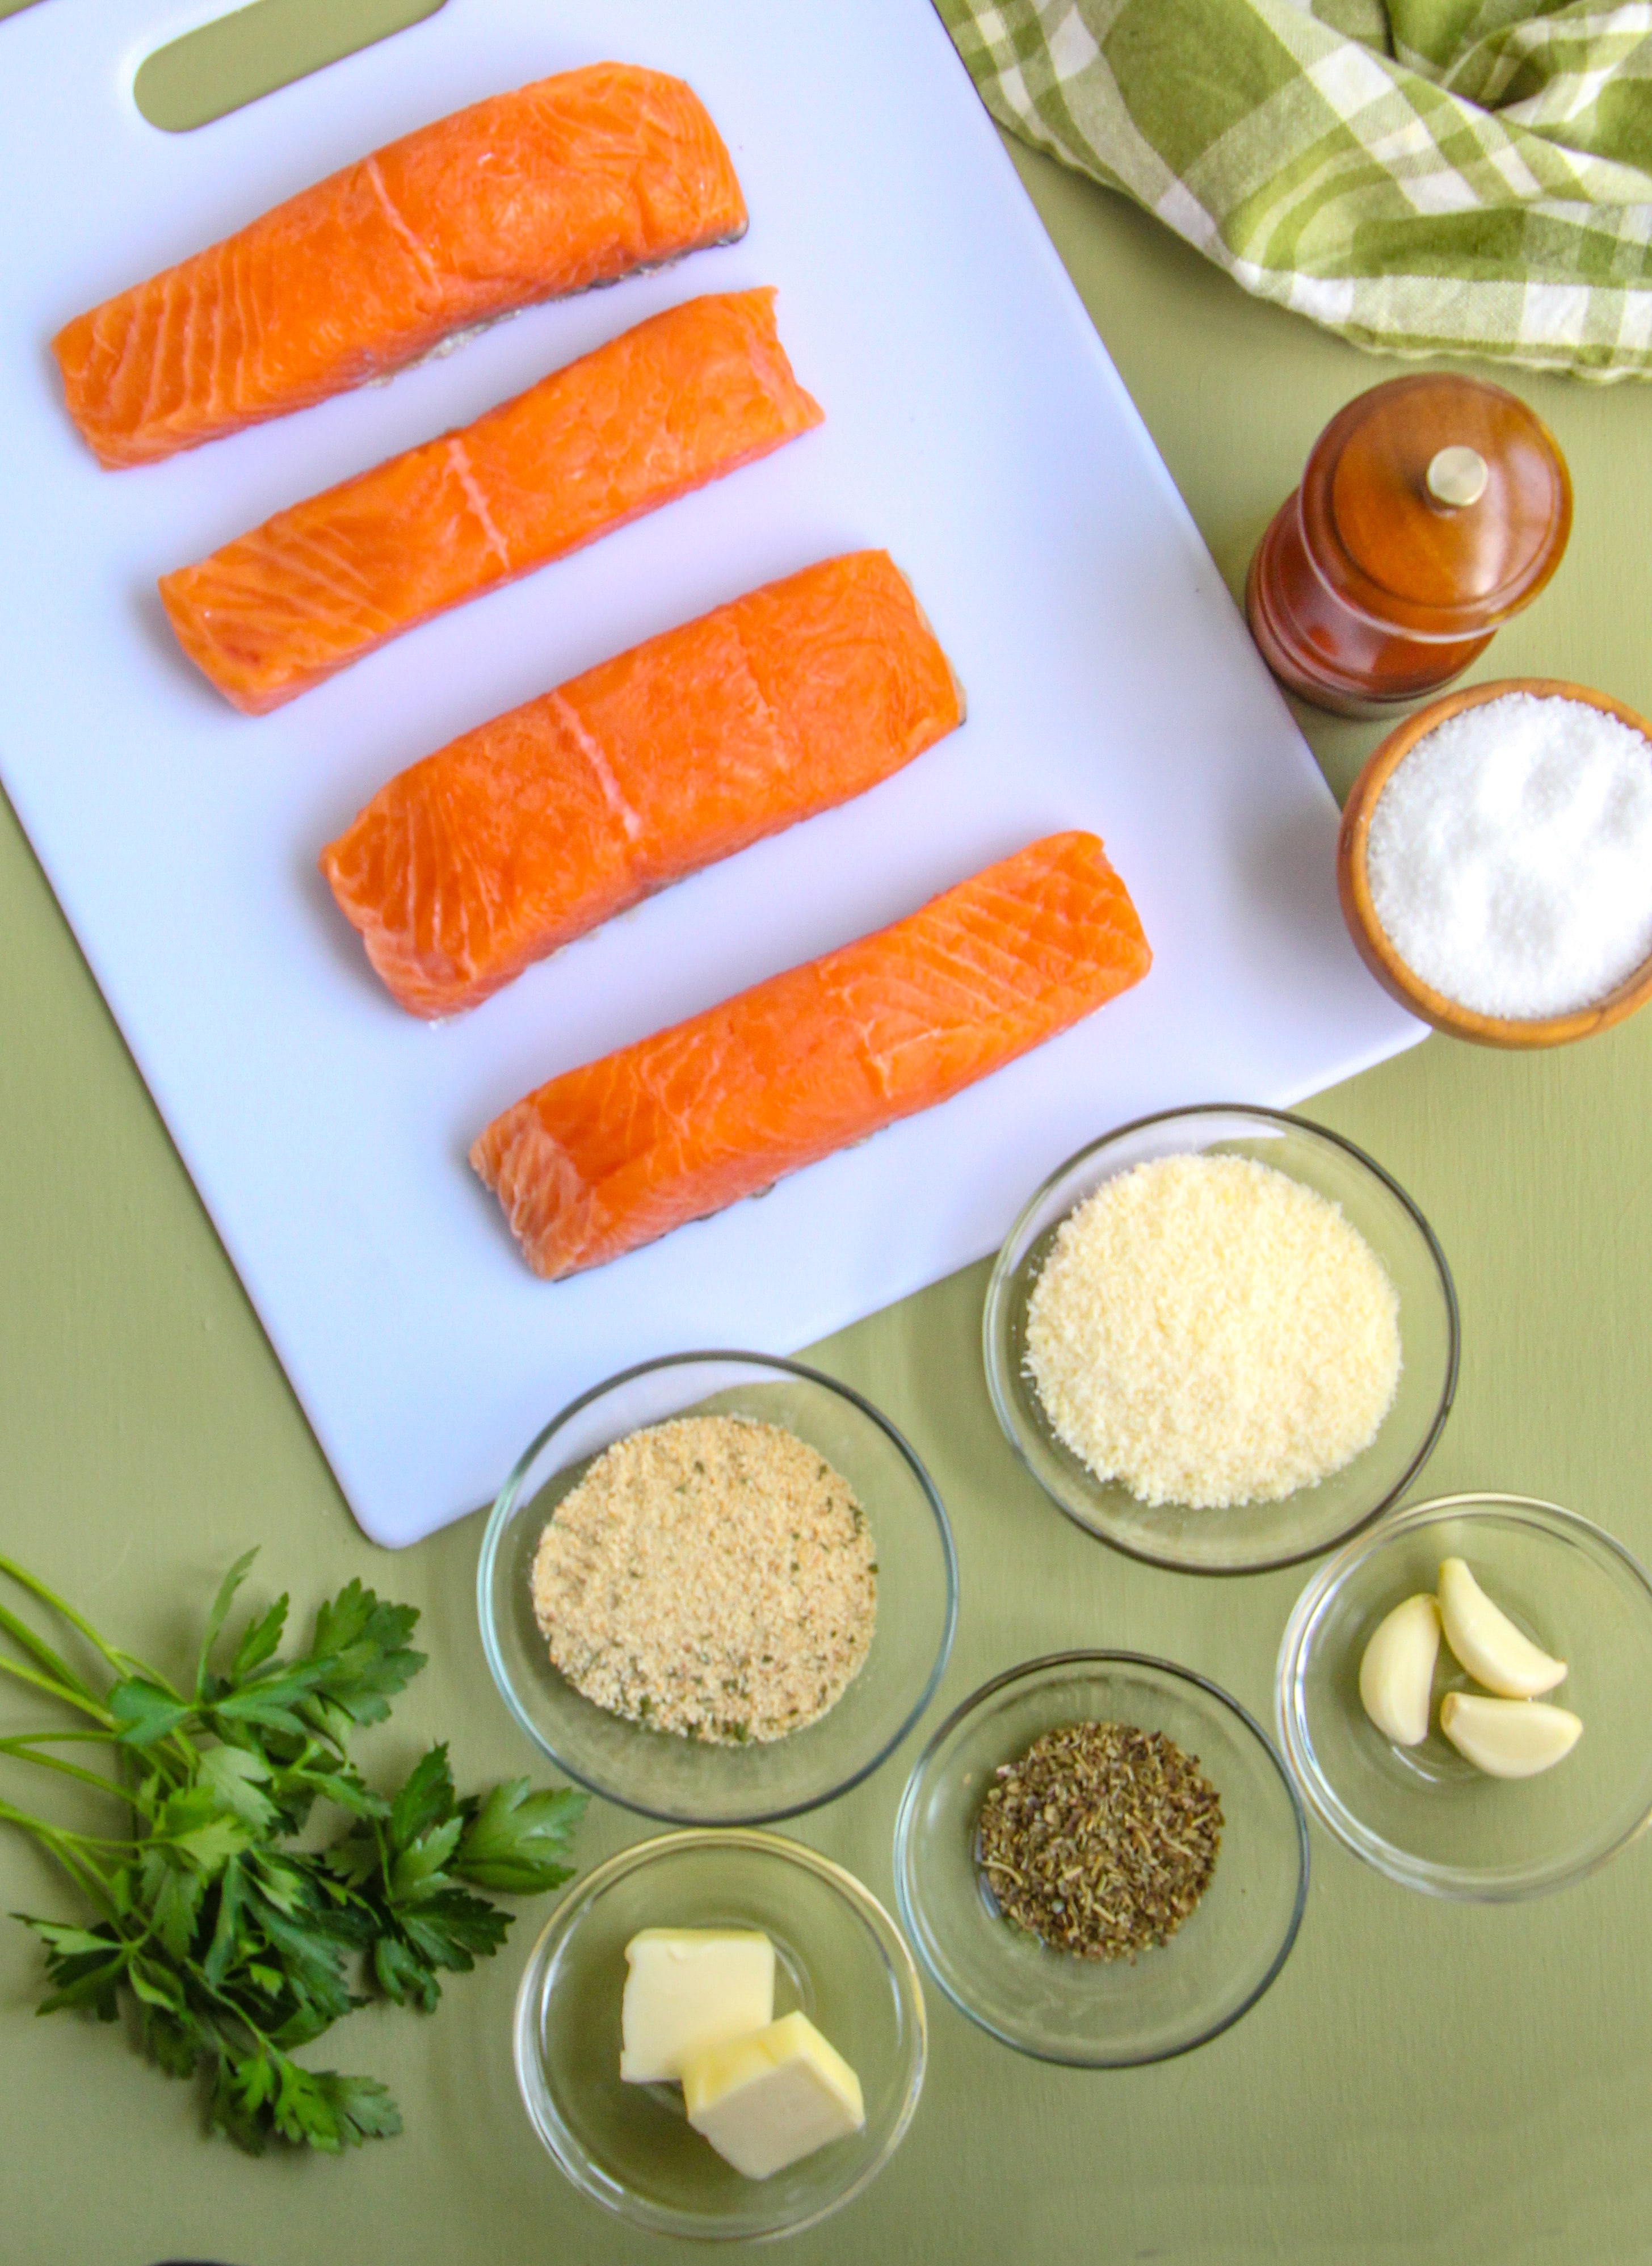 Four salmon fillets with measured ingredients to make this recipe presented in glass bowls.